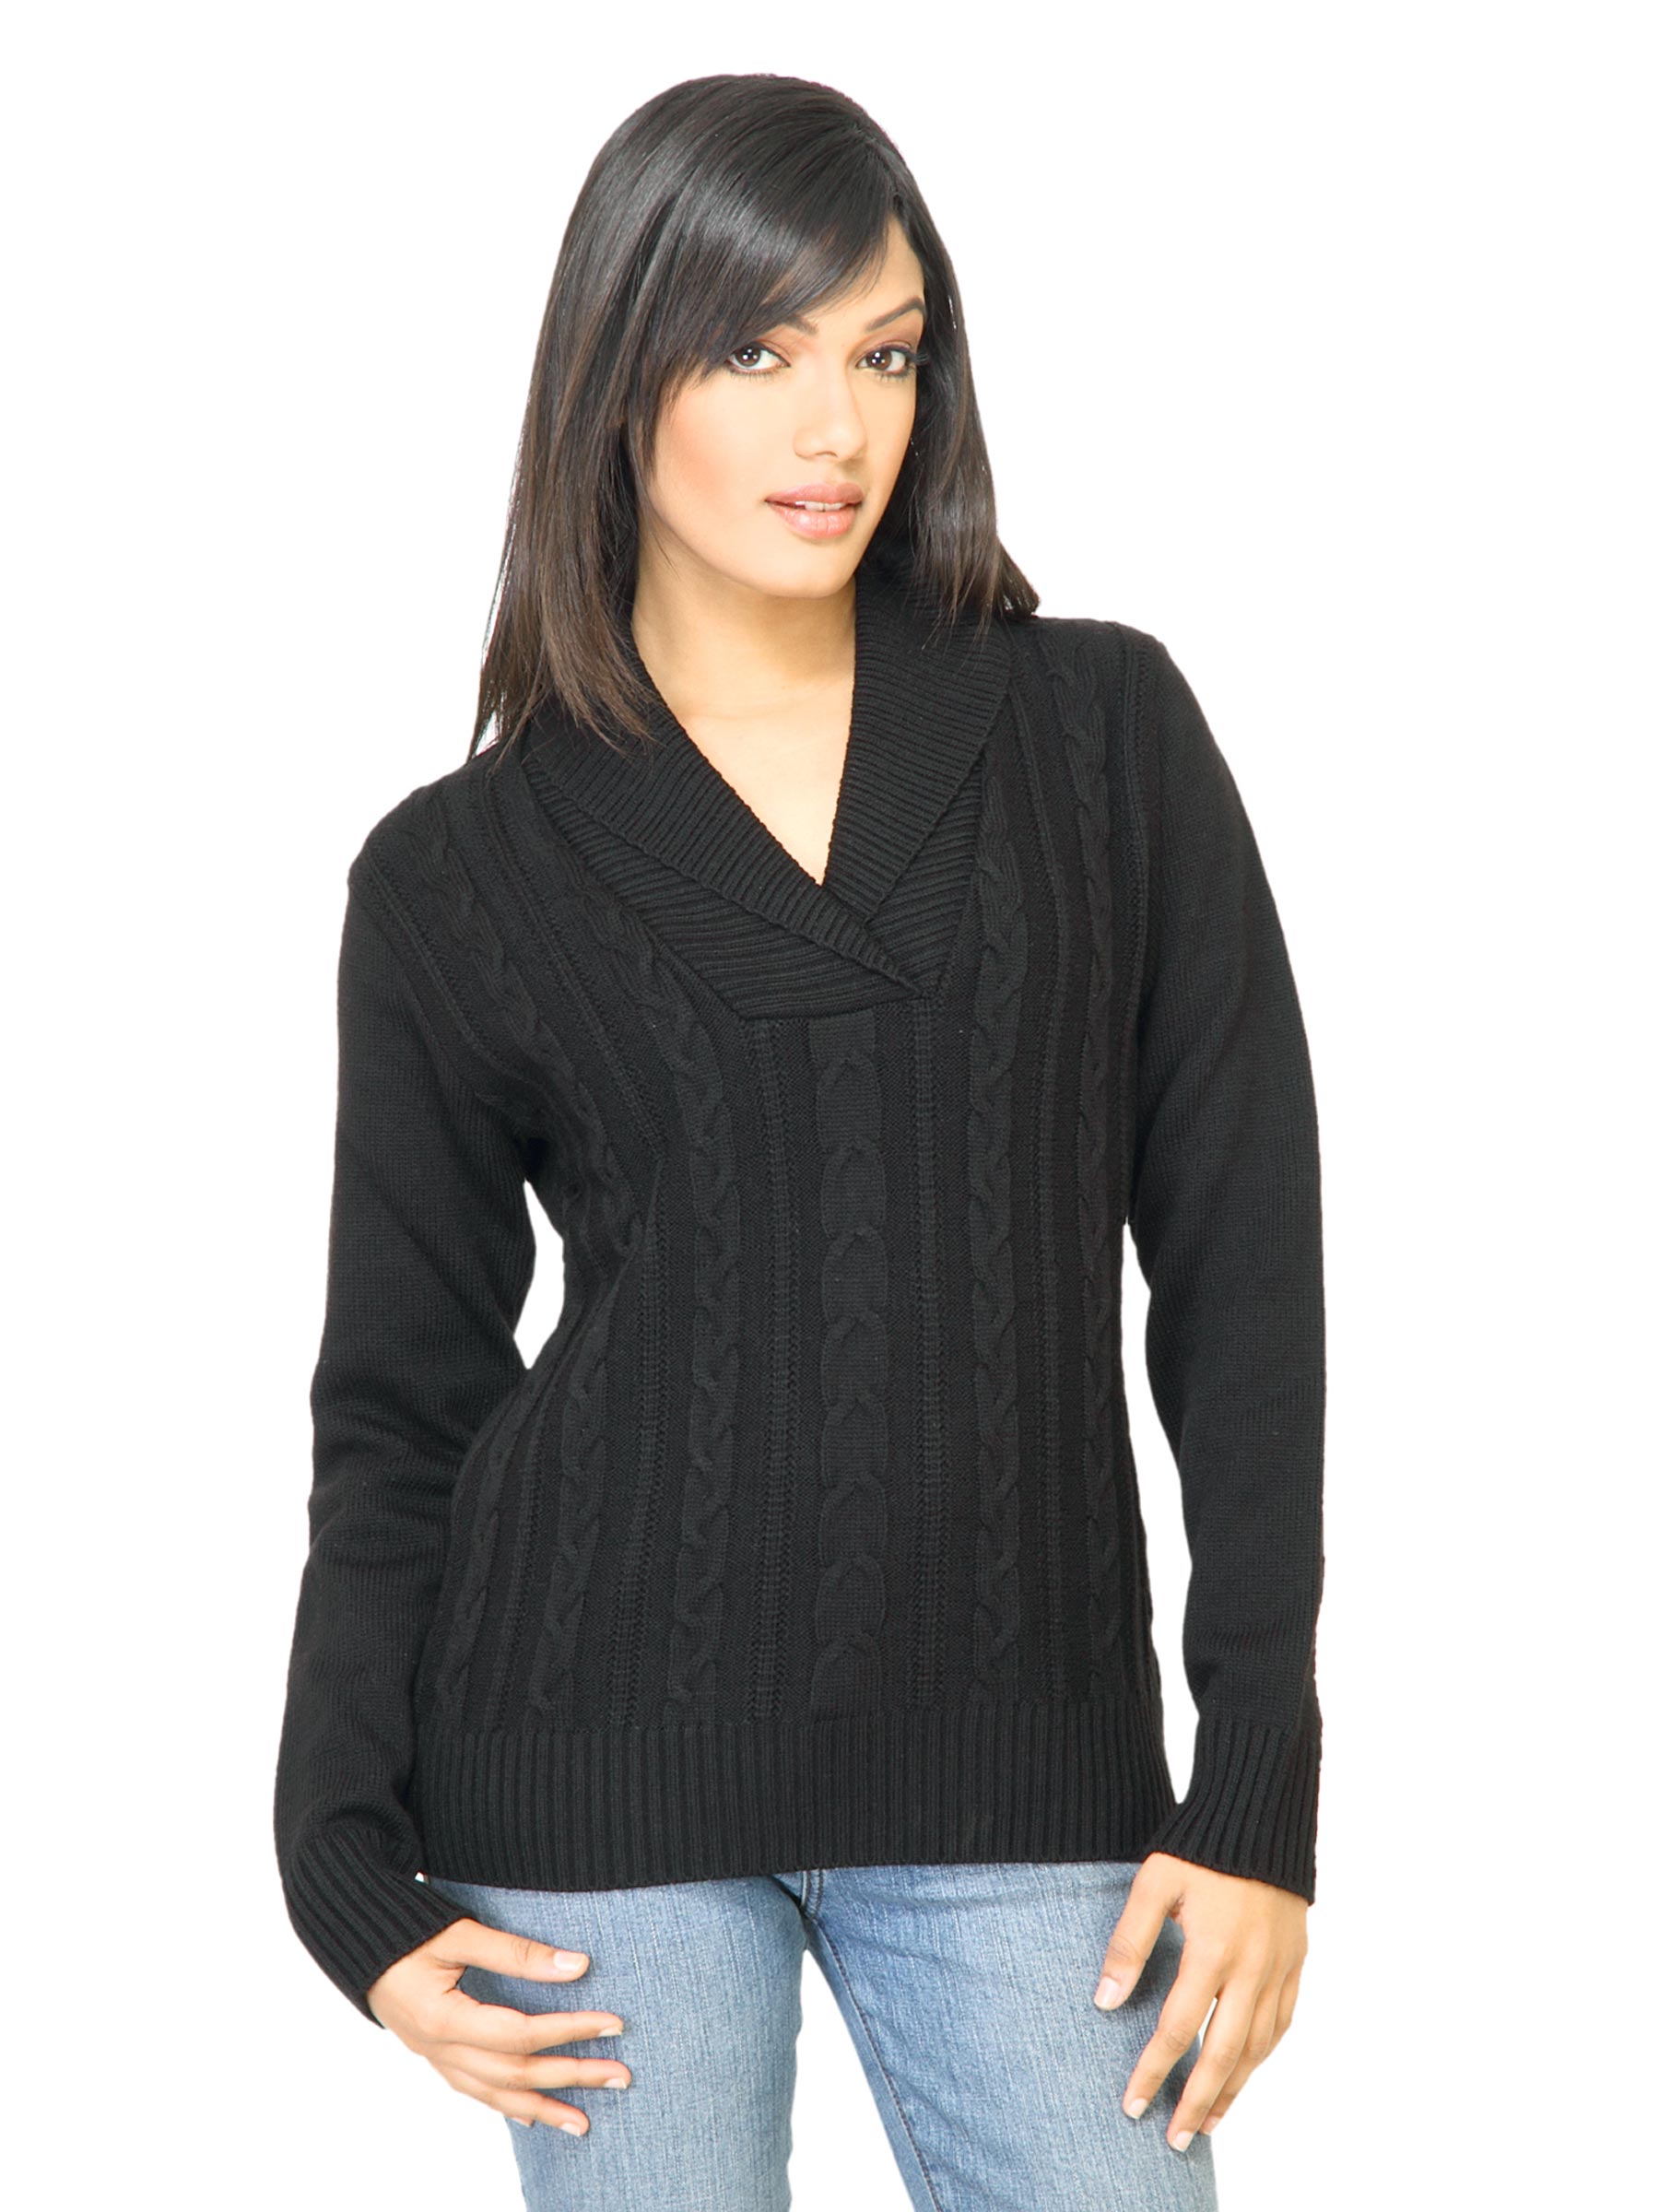 Scullers For Her Women Solid Black Sweater